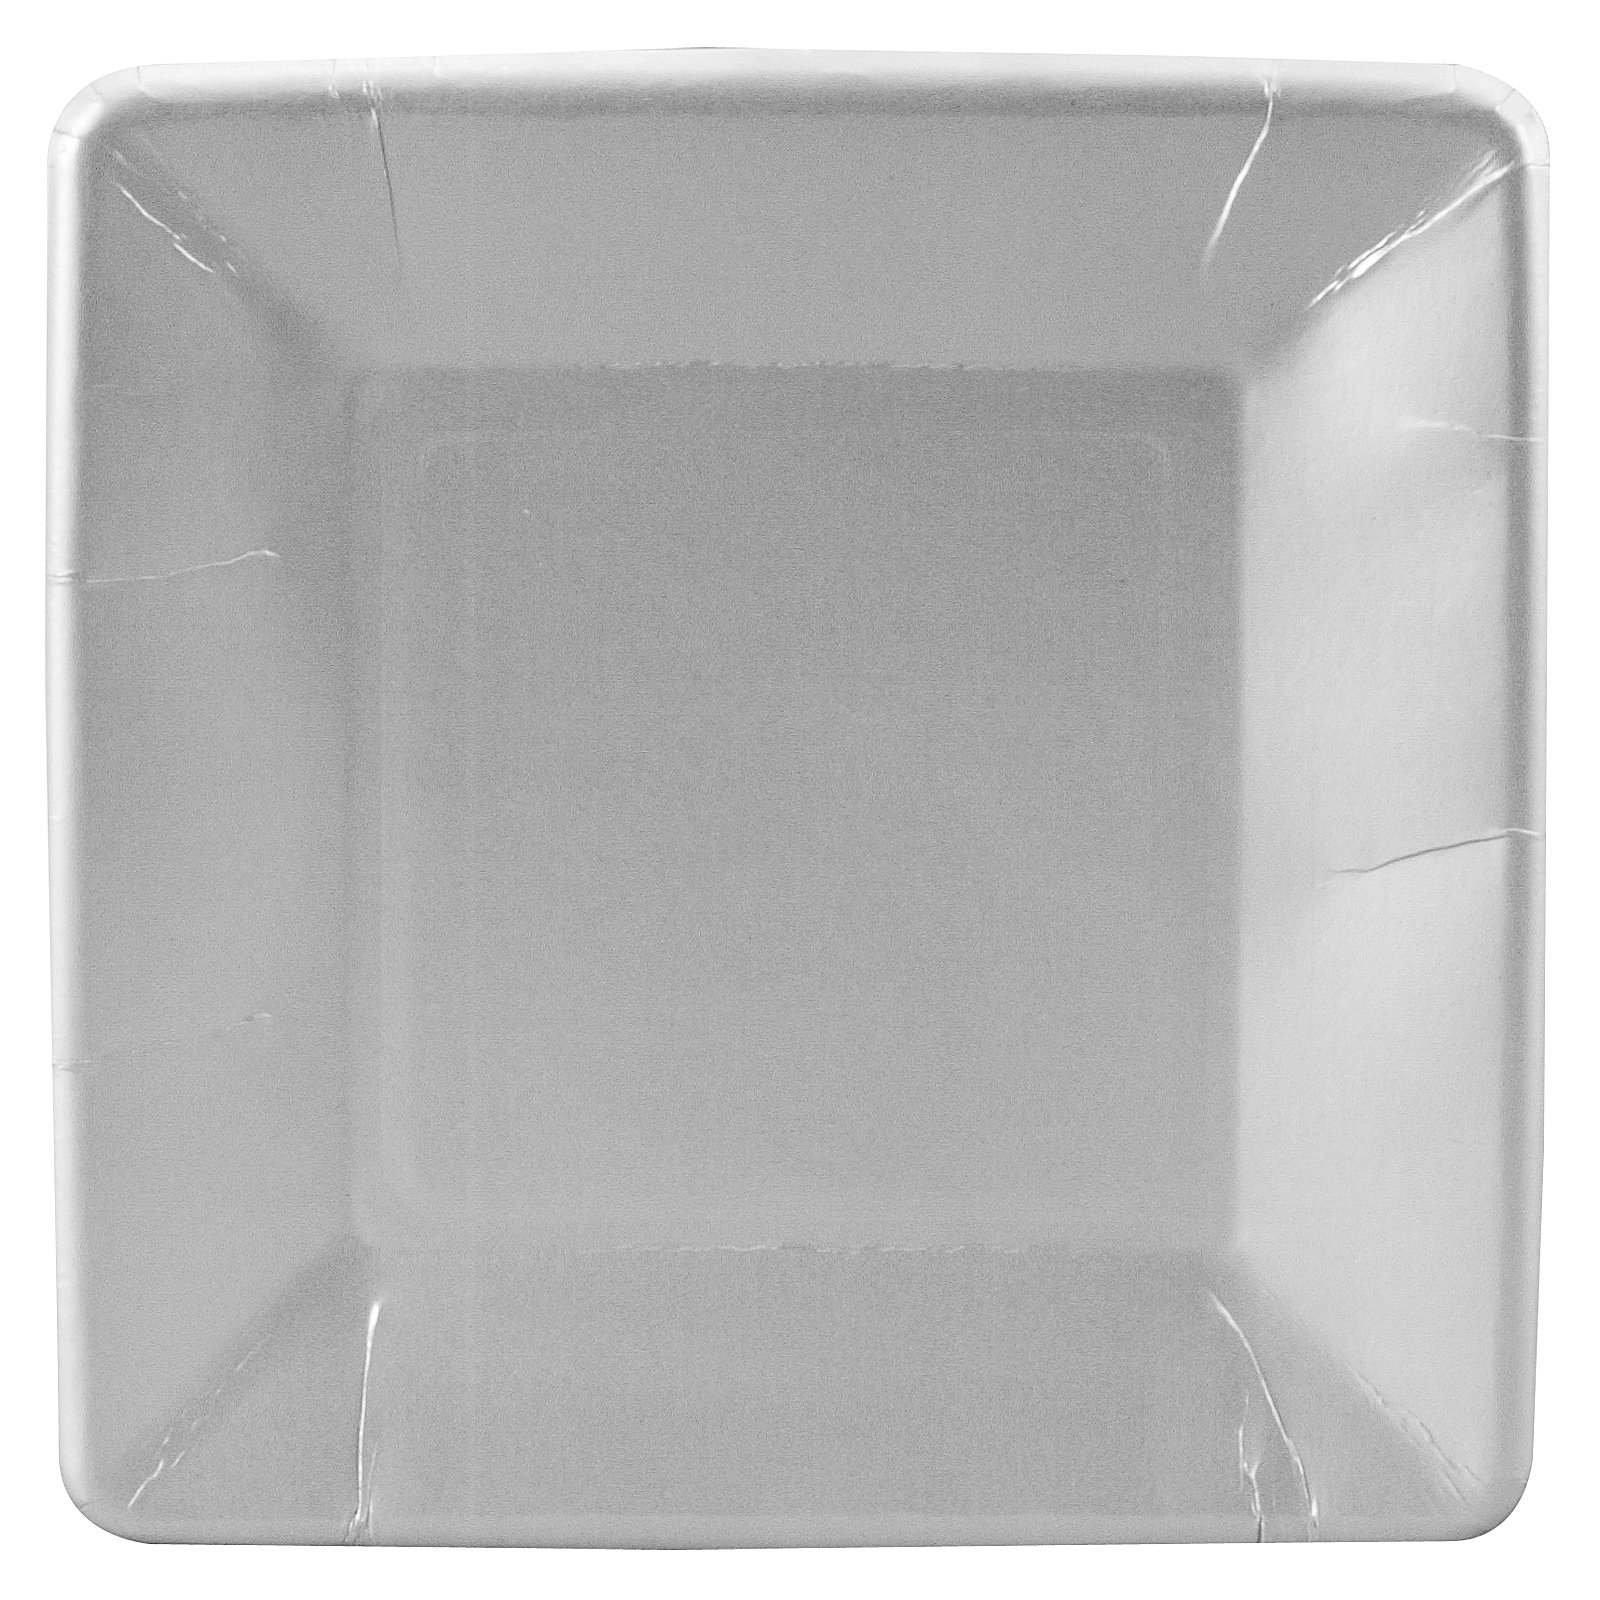 Shimmering Silver (Silver) Square Dessert Plates (18 count)